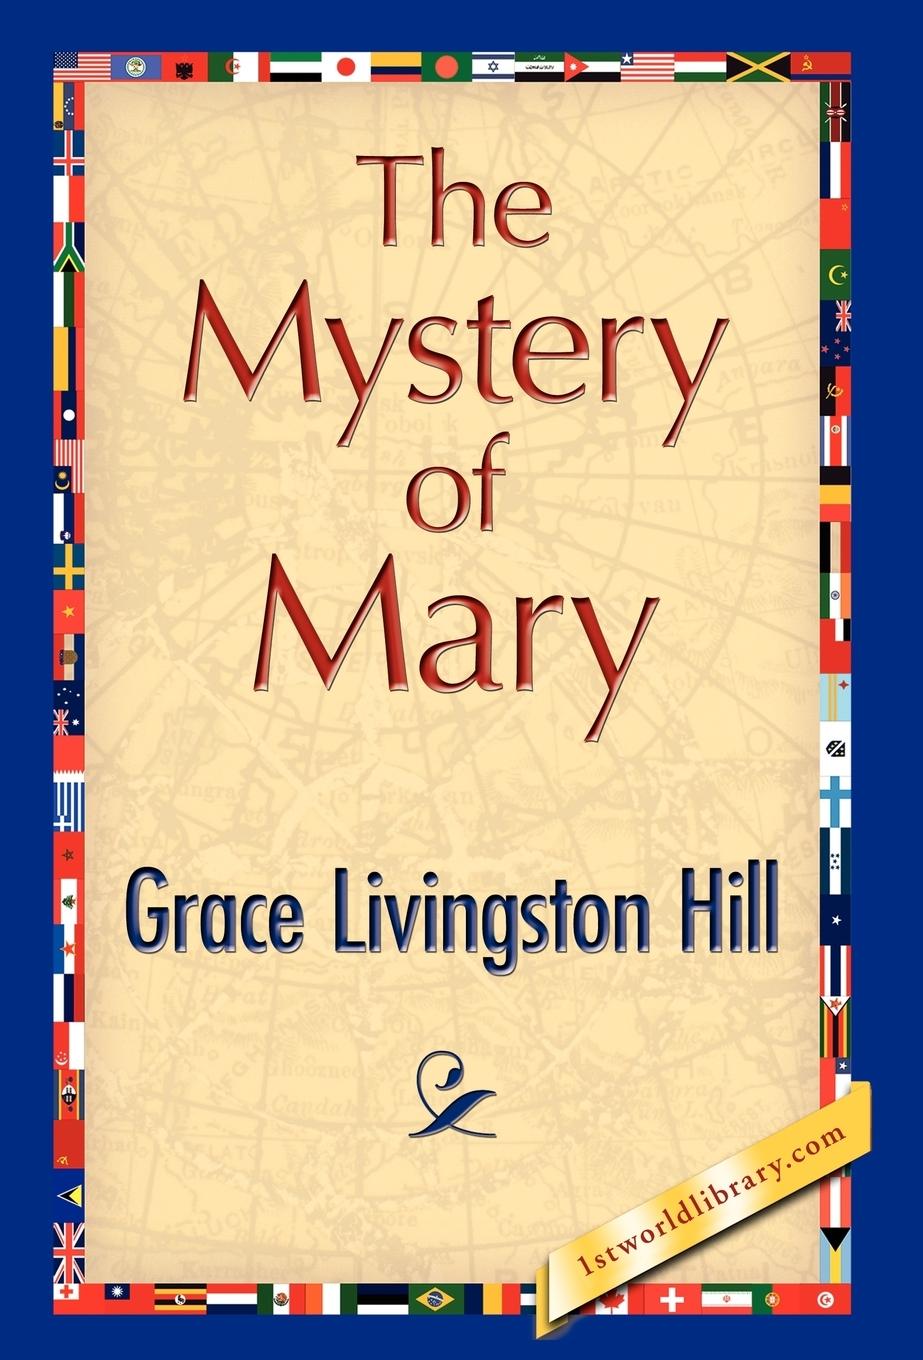 The Mystery of Mary - Grace Livingston Hill, Livingston Hill Grace Livingston Hill